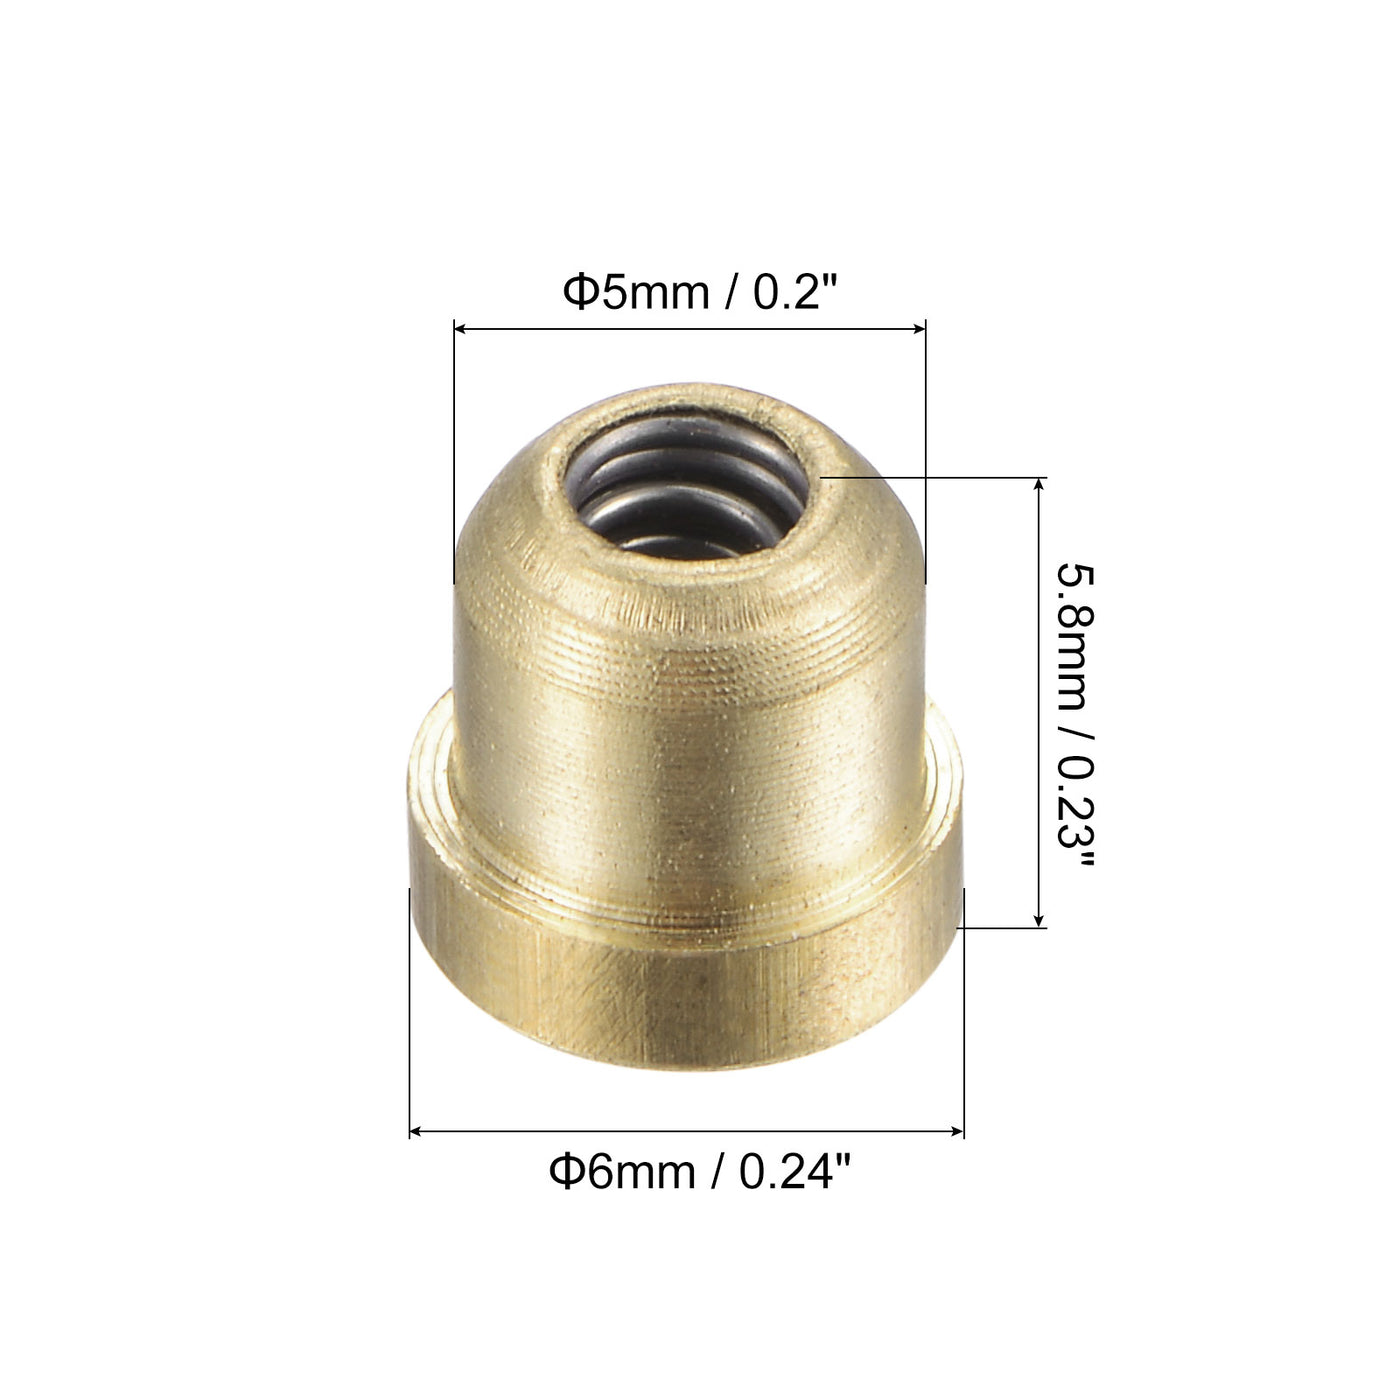 Uxcell Uxcell Brass Push Button Flange Grease Oil Cup 5mm for Lubrication System 4Pcs